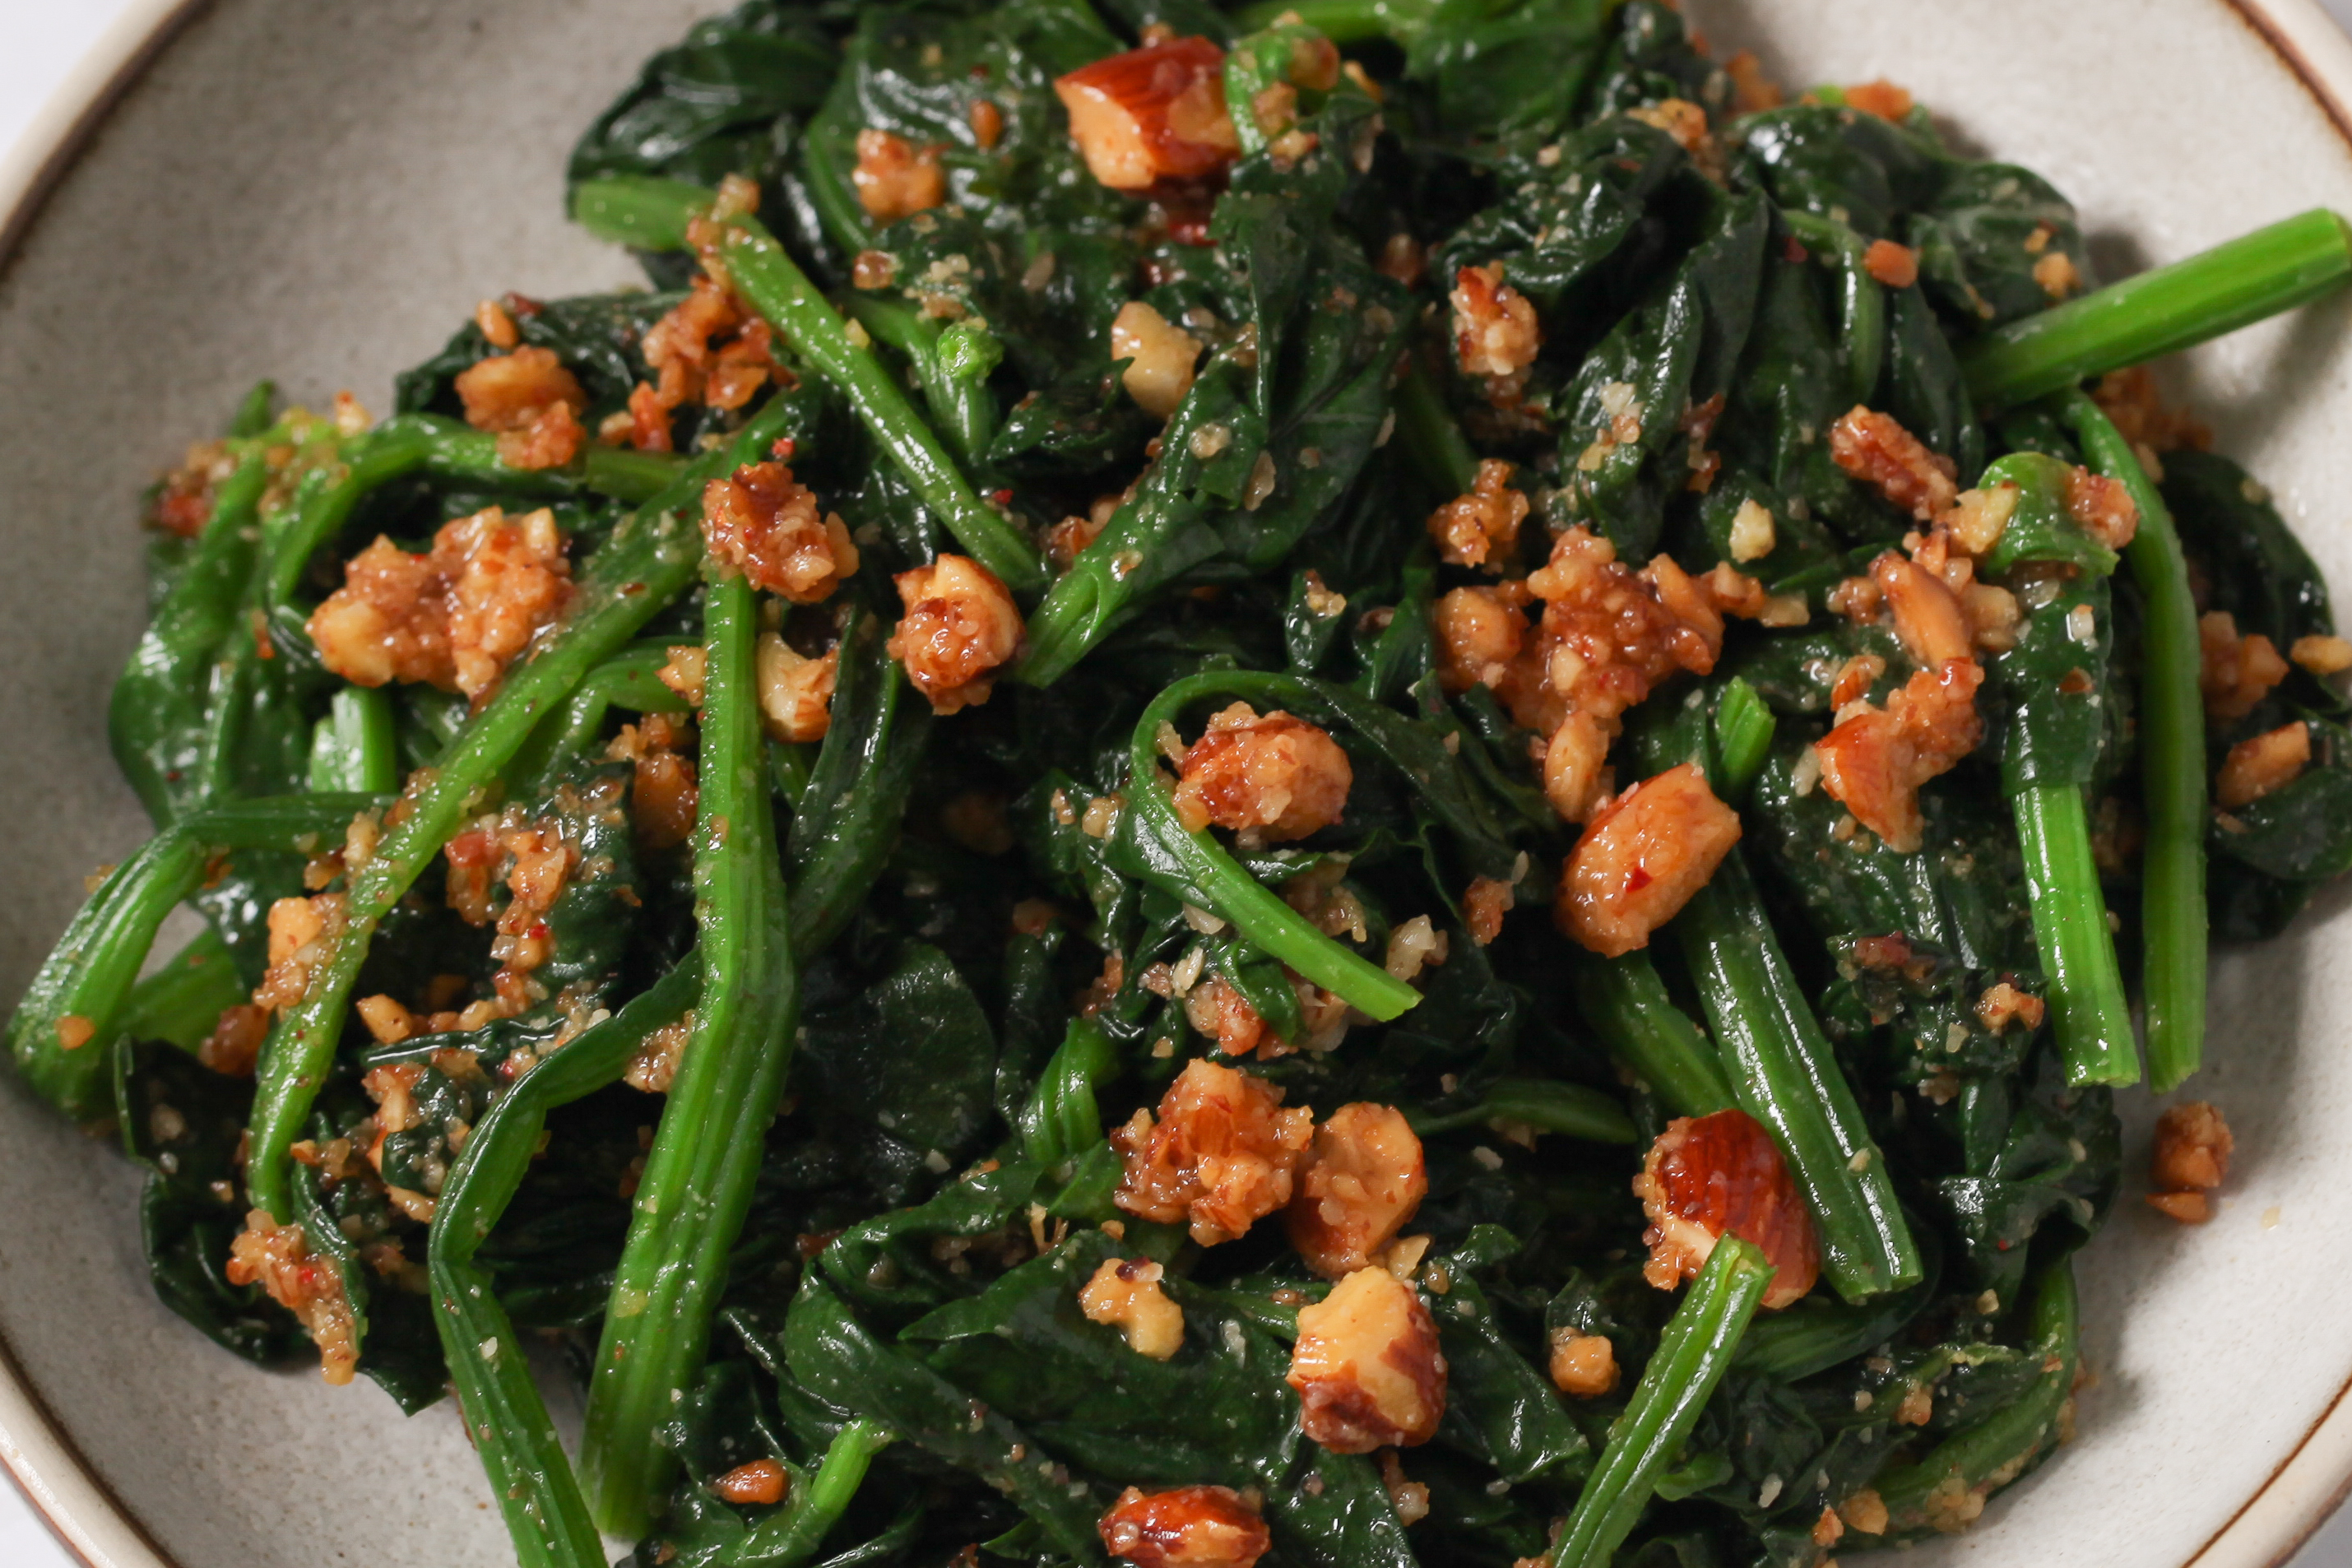 Spinach with crunchy almond butter & chili